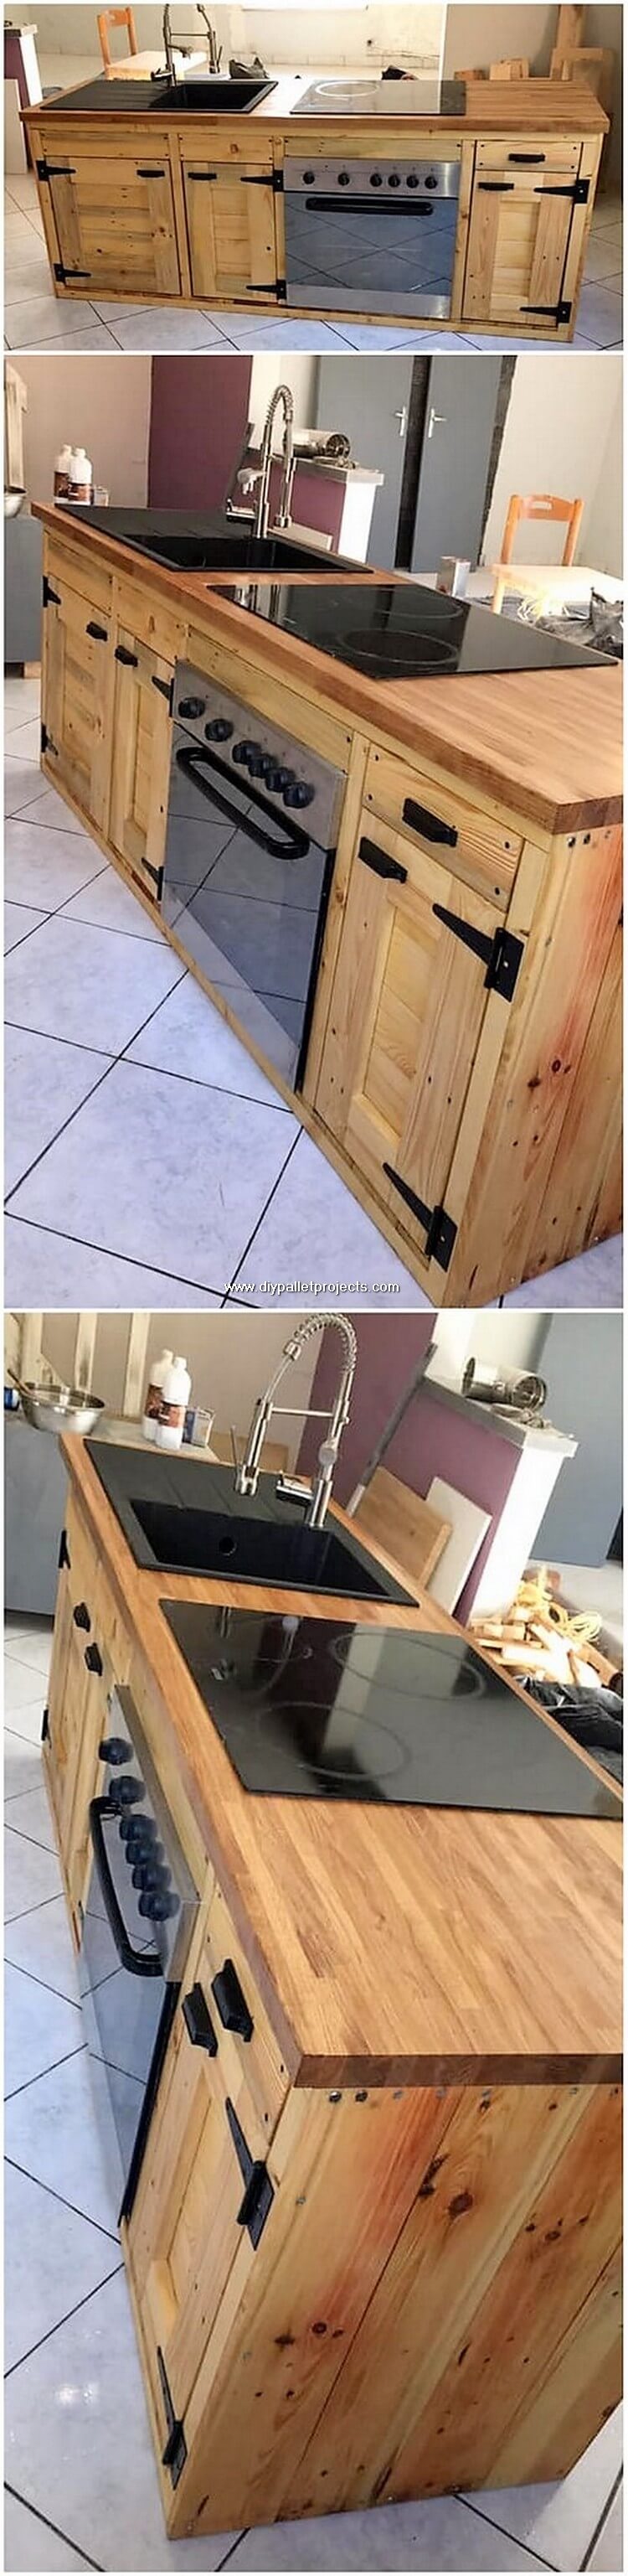 Pallet Kitchen Island Table with Sink